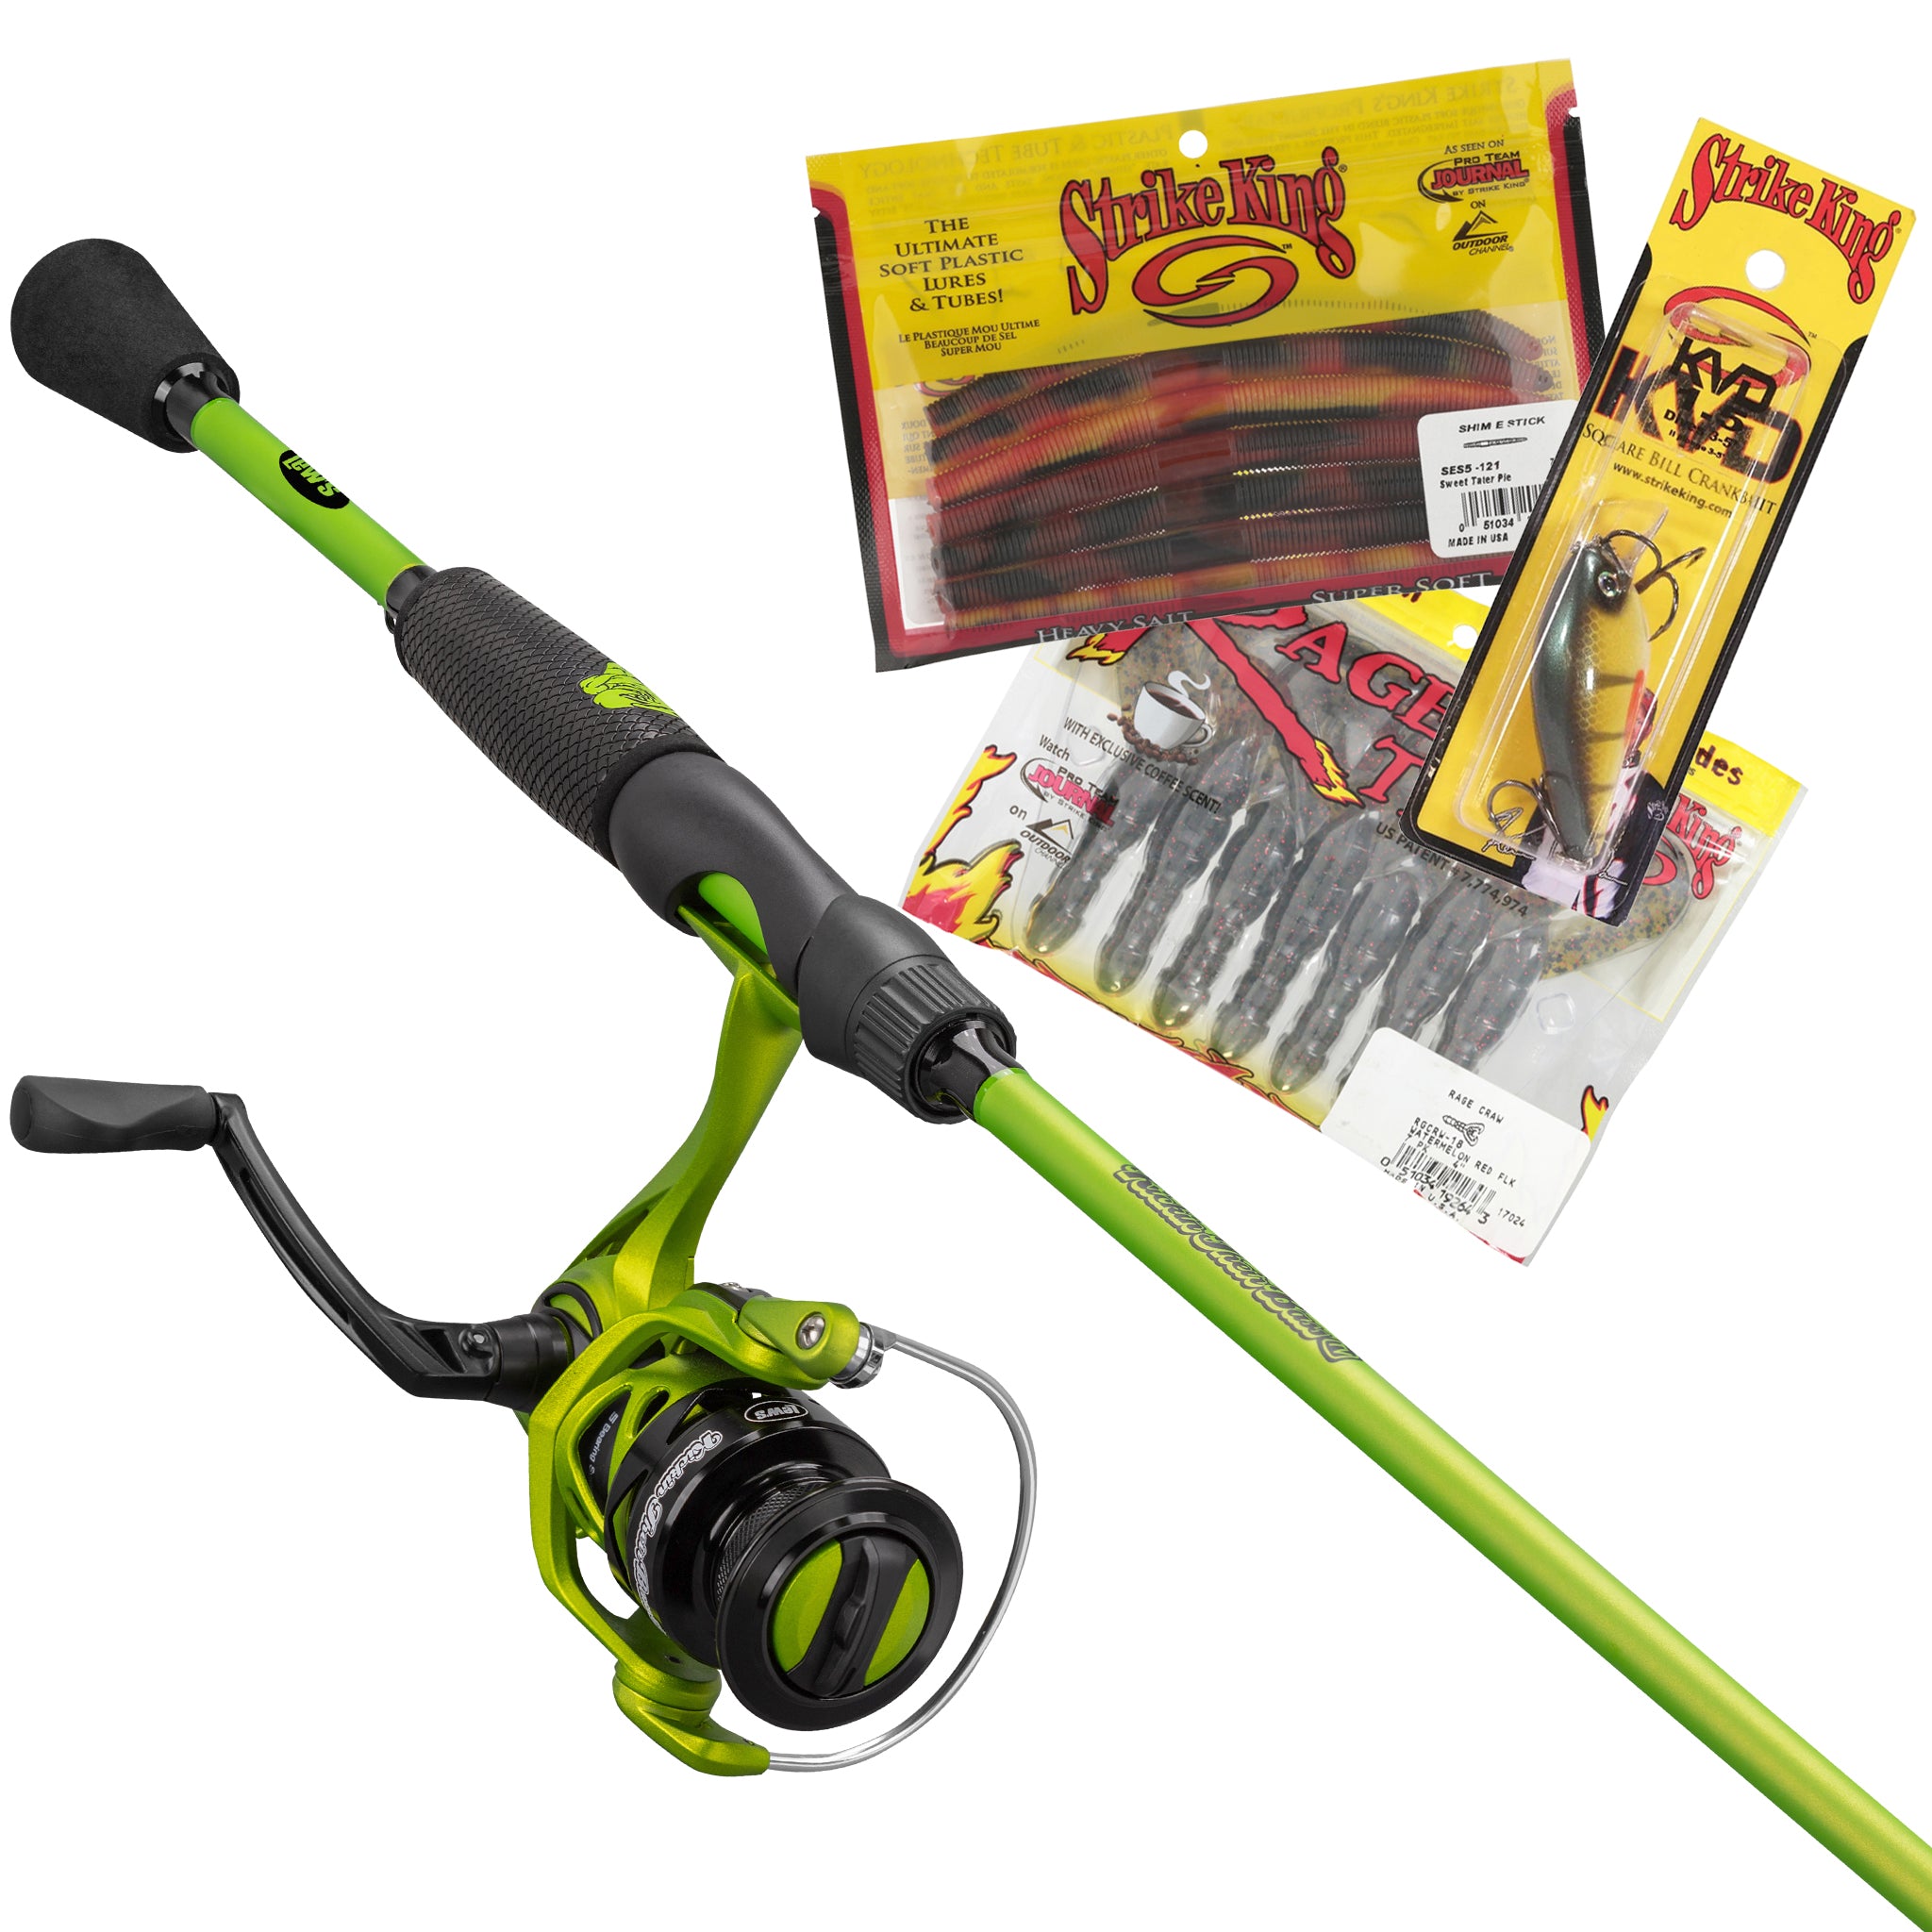 FREE 3 Strike King Baits & Kickin' Their Bass x Lew's Spinning Combo Package